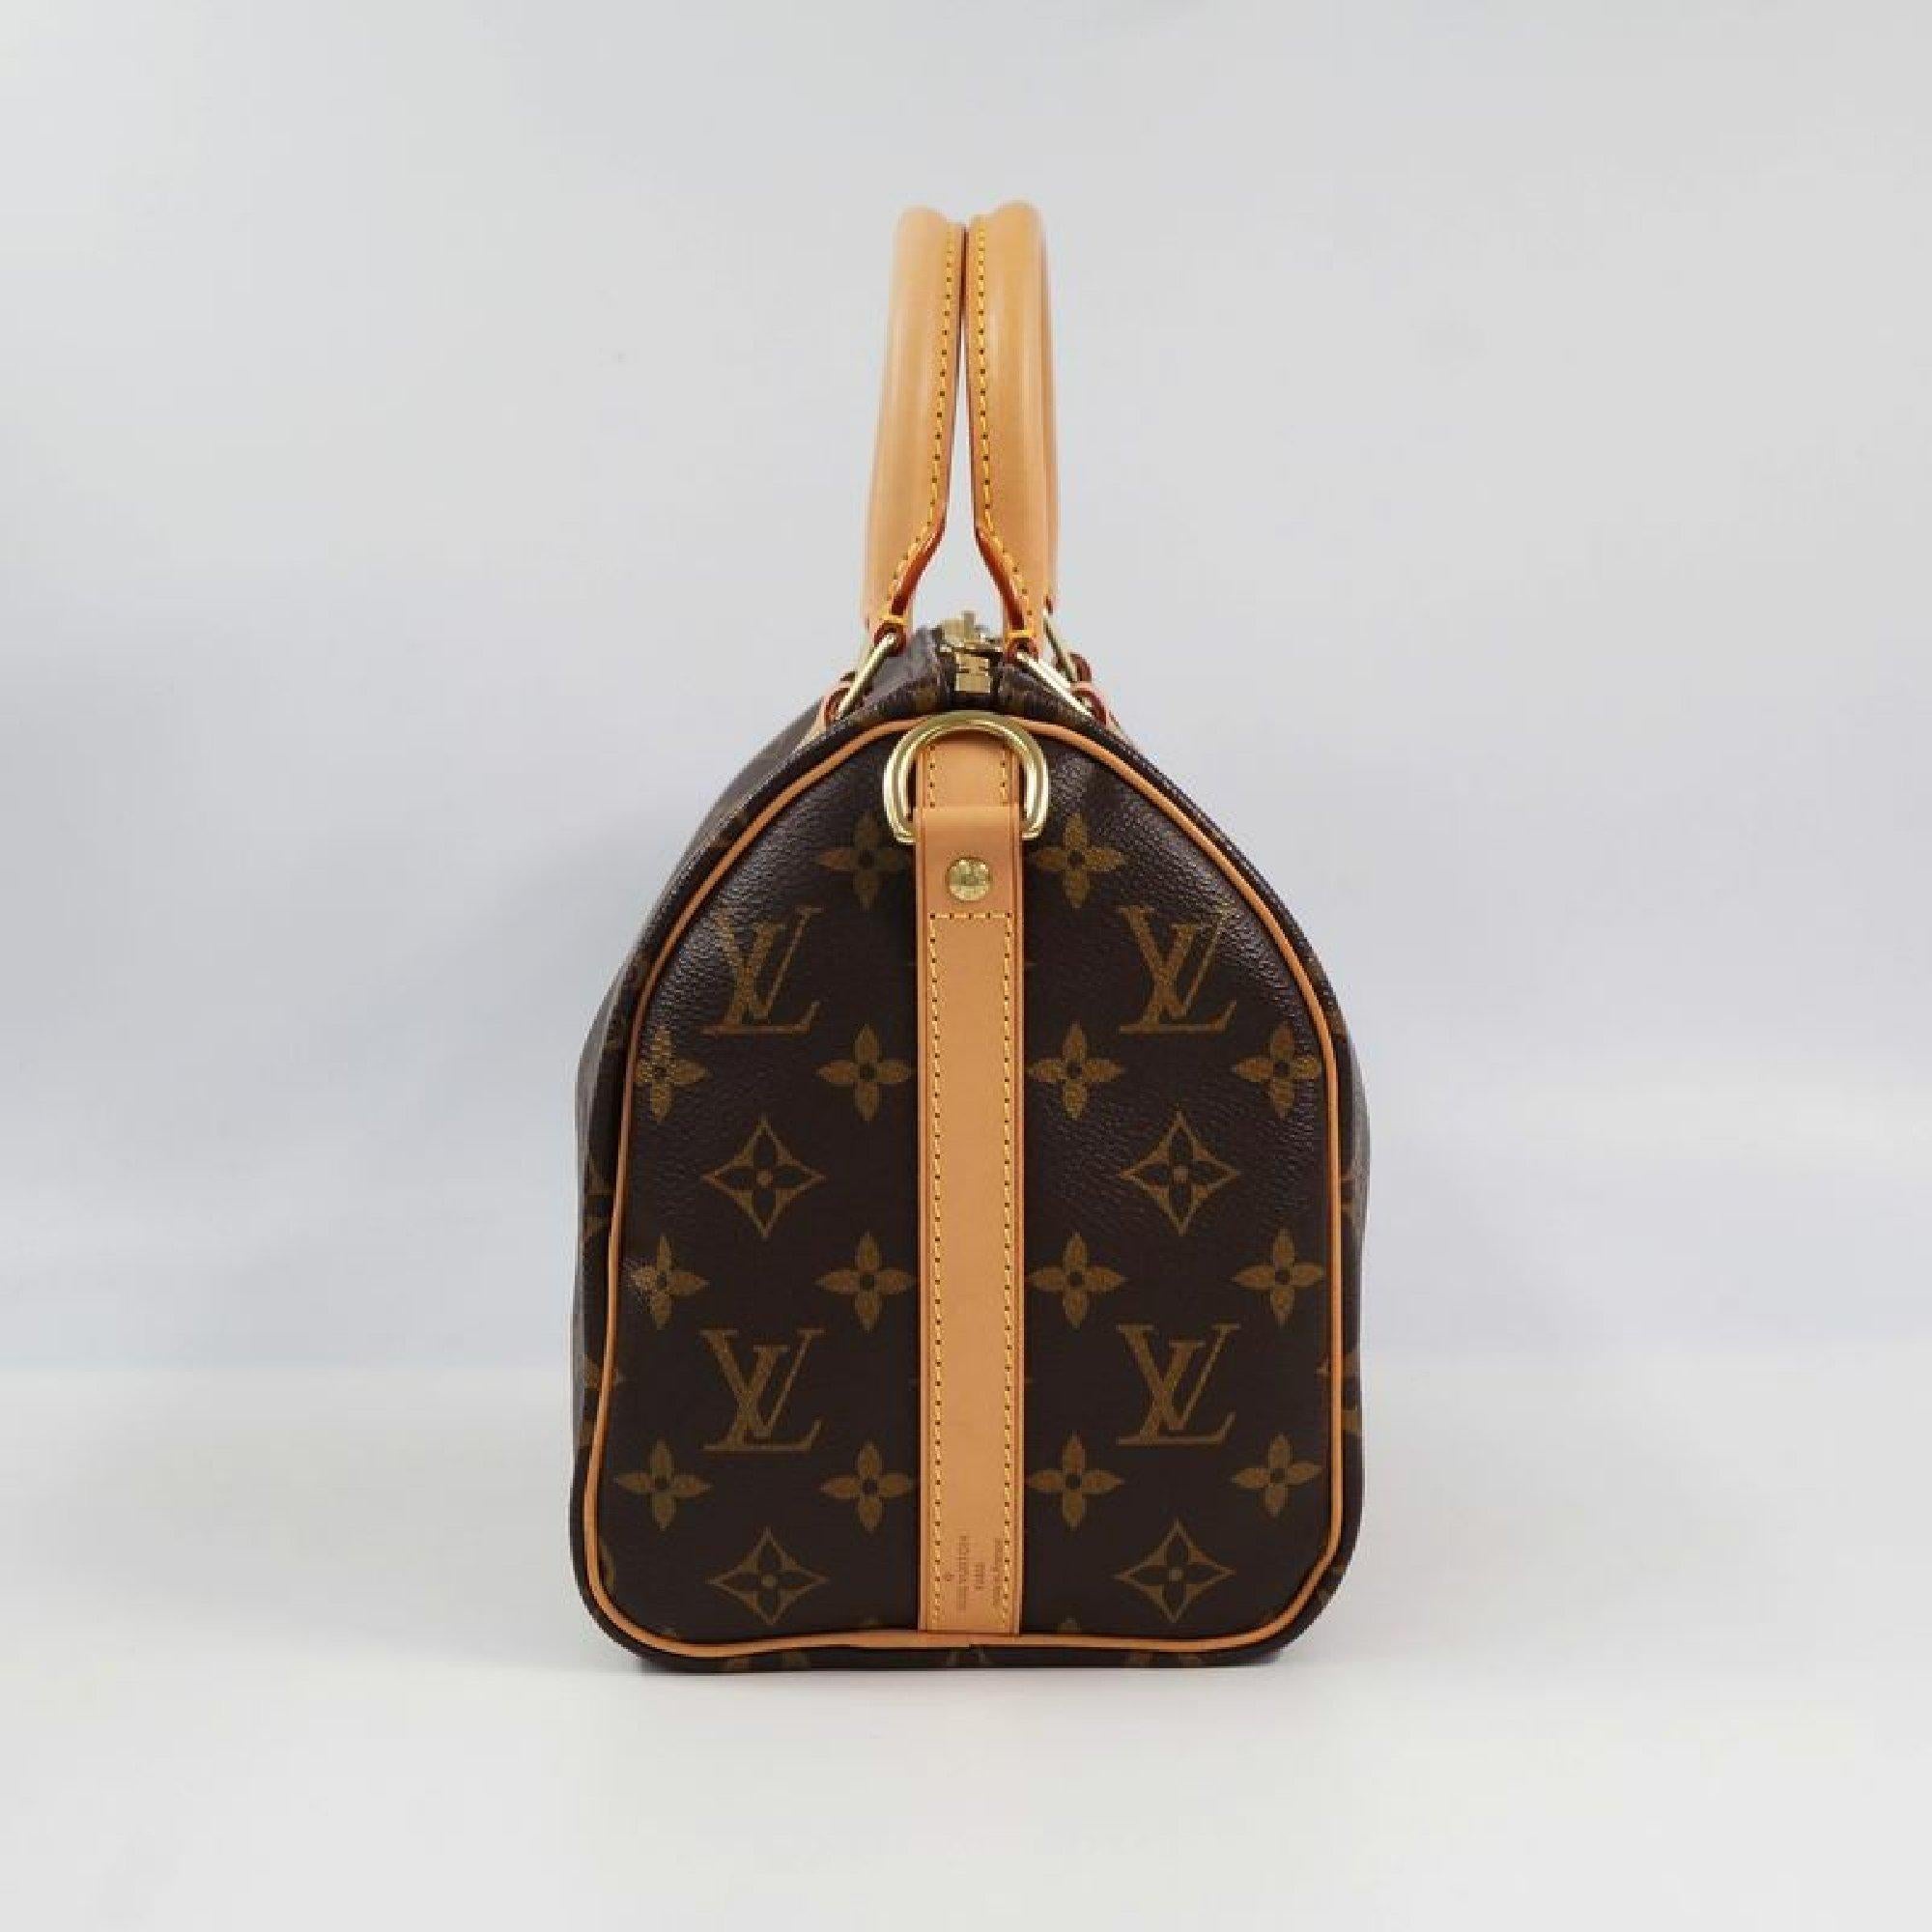 An authentic LOUIS VUITTON 2WAY shoulder bag Speedy bandouliere 25 Womens handbag M41113 brow. The color is Brown. The outside material is Monogram canvas/ smooth leather. The pattern is Speedy bandouliere25. This item is Contemporary. The year of